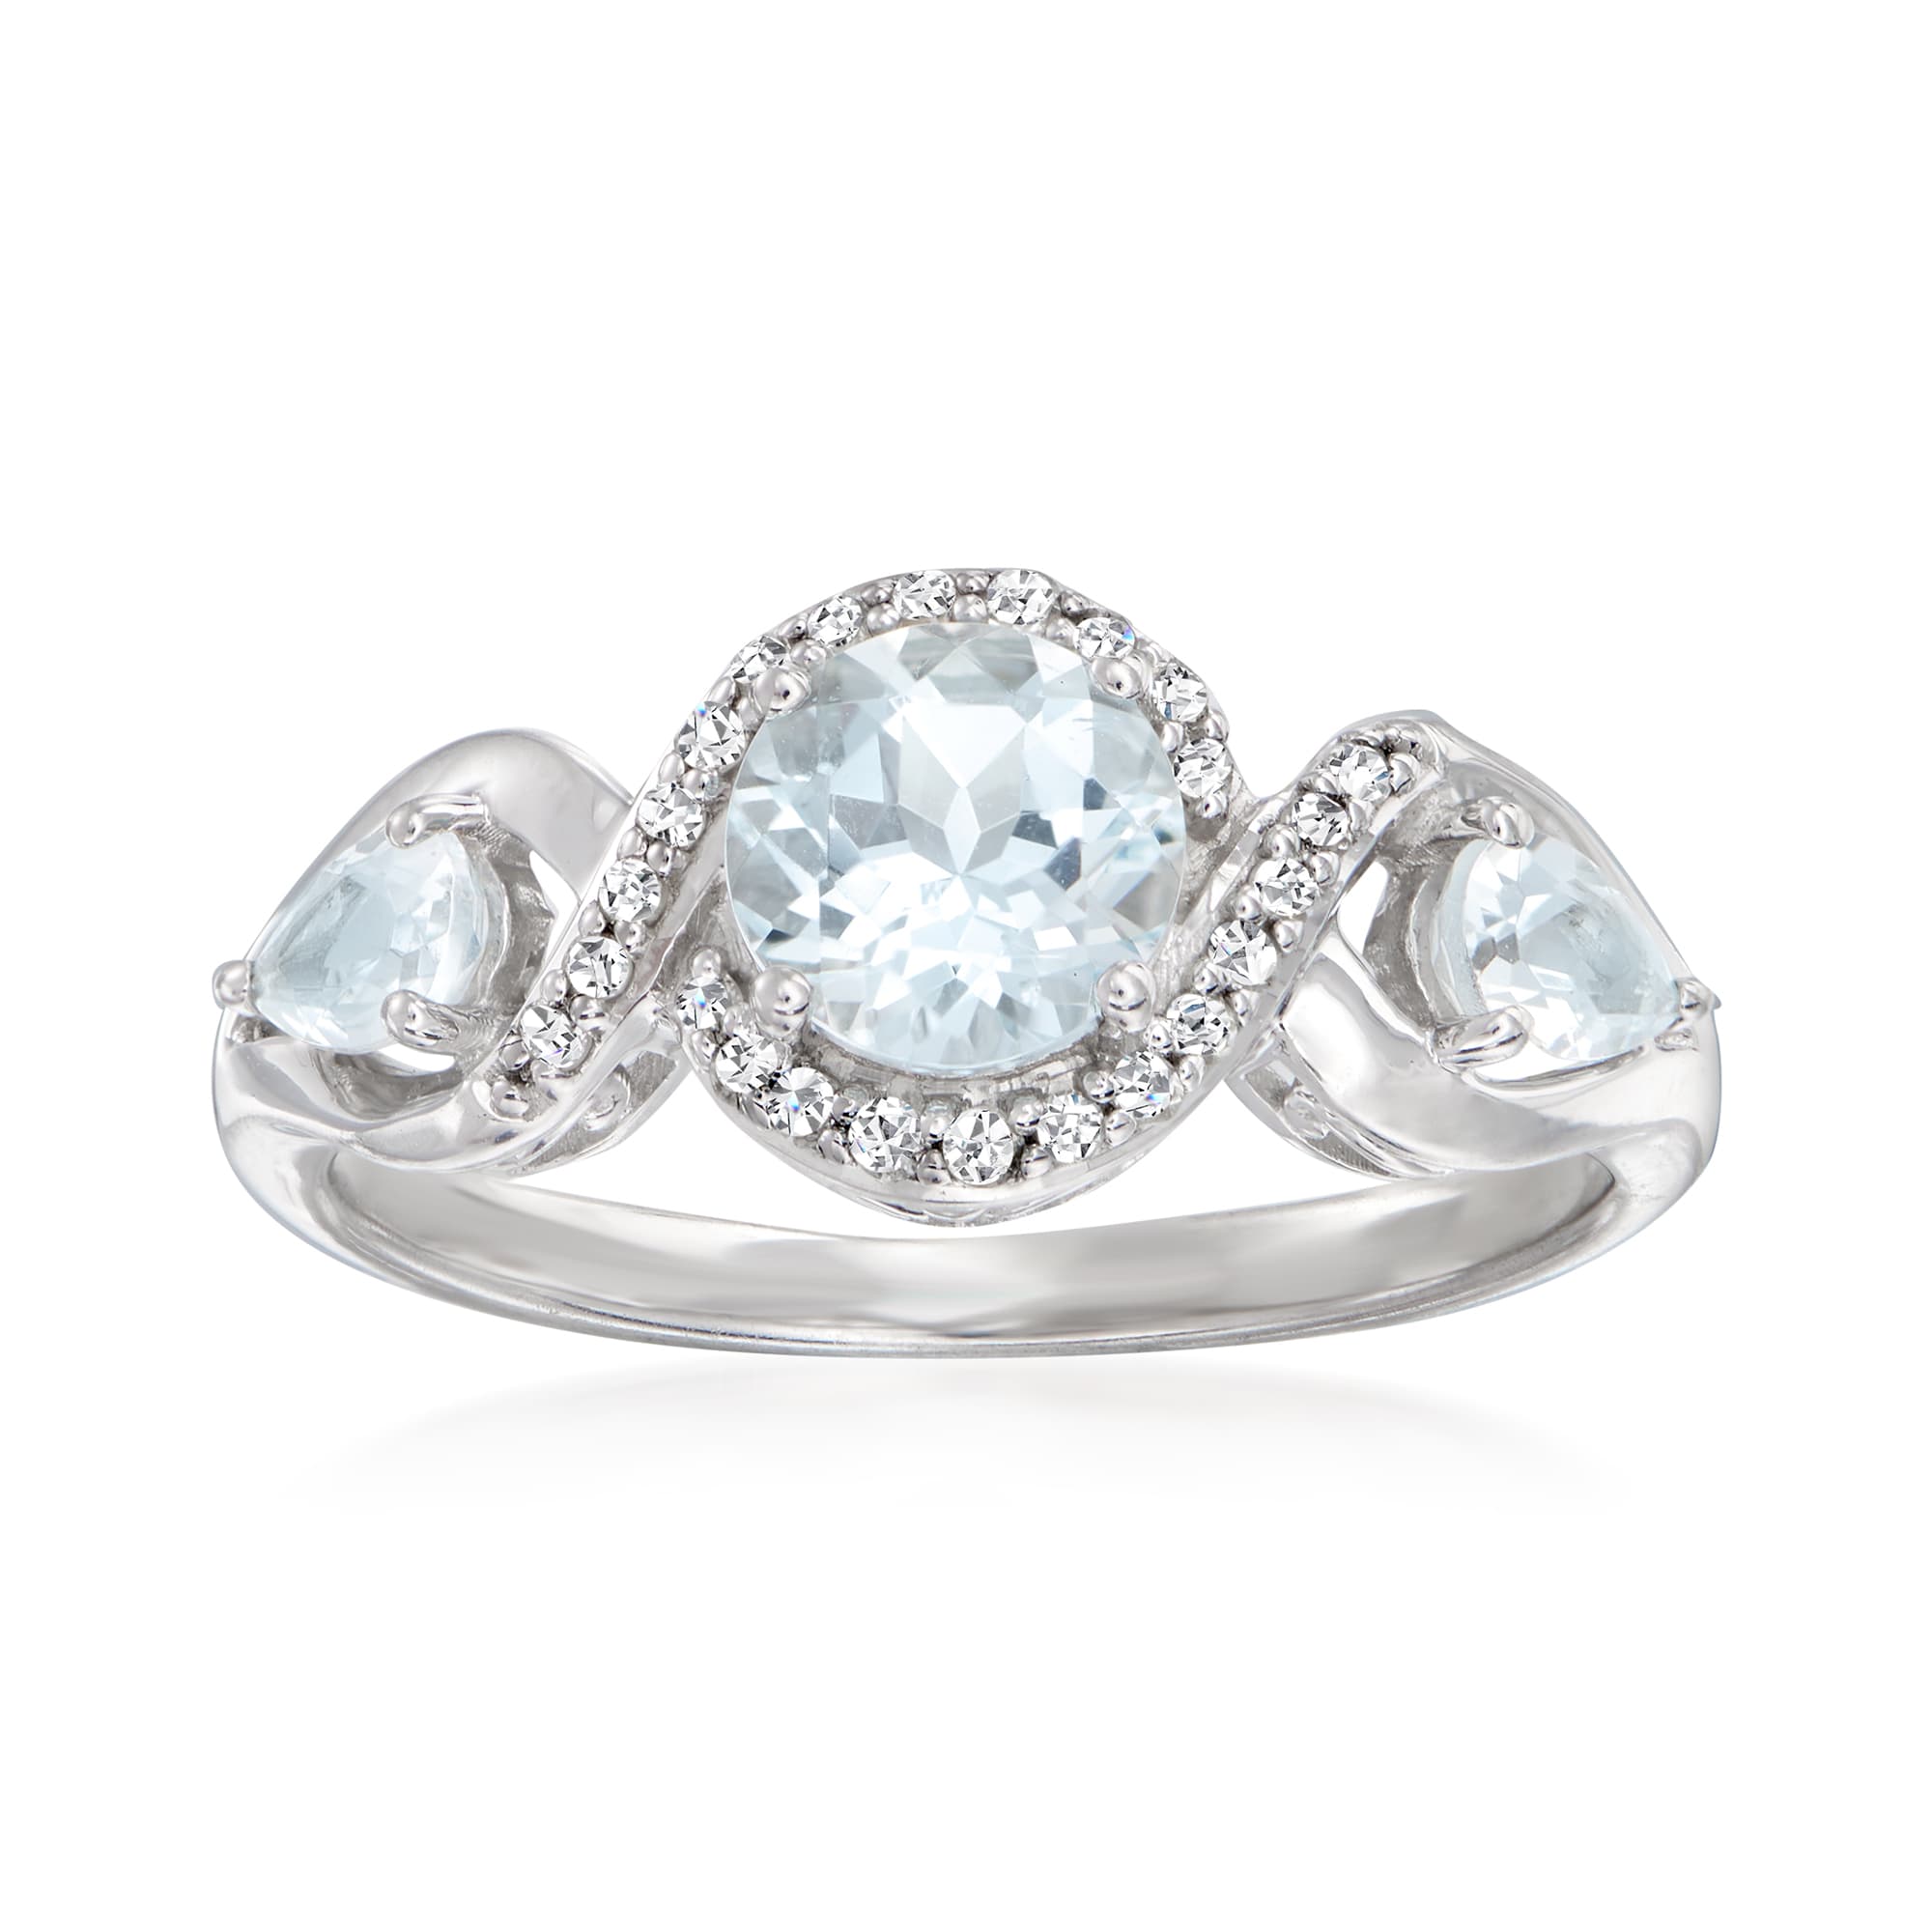 1.10 ct. t.w. Aquamarine and .84 ct. t.w. Diamond Ring in Sterling ...